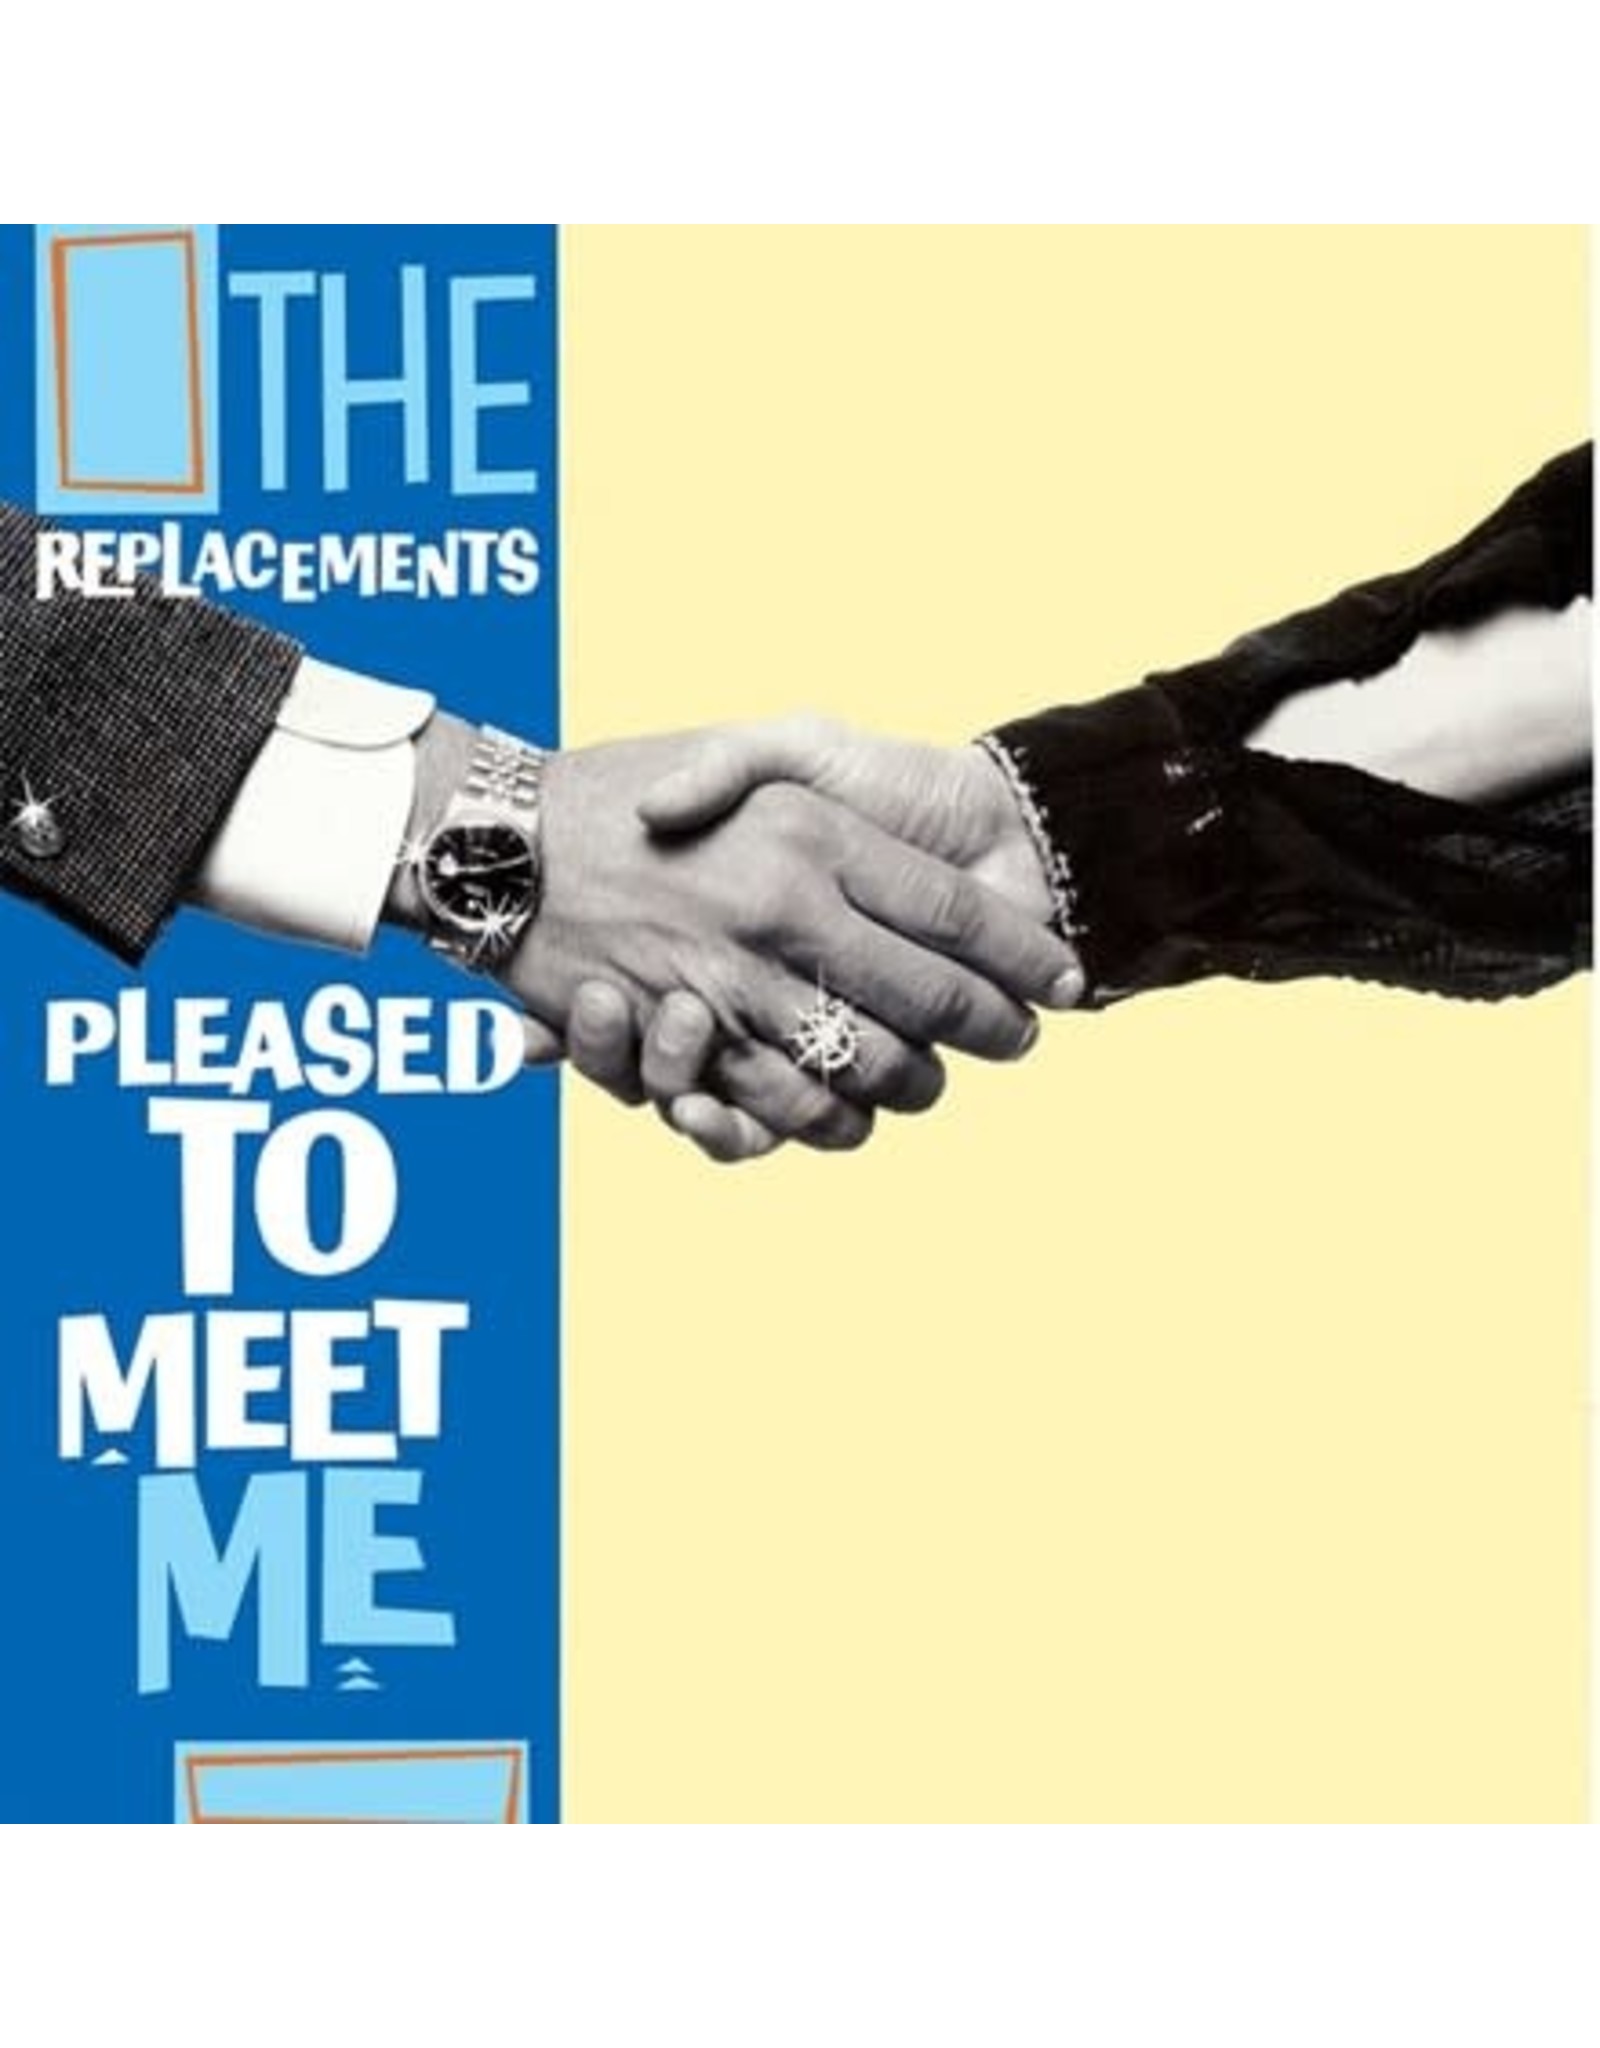 Rhino Replacements: Pleased to Meet Me LP